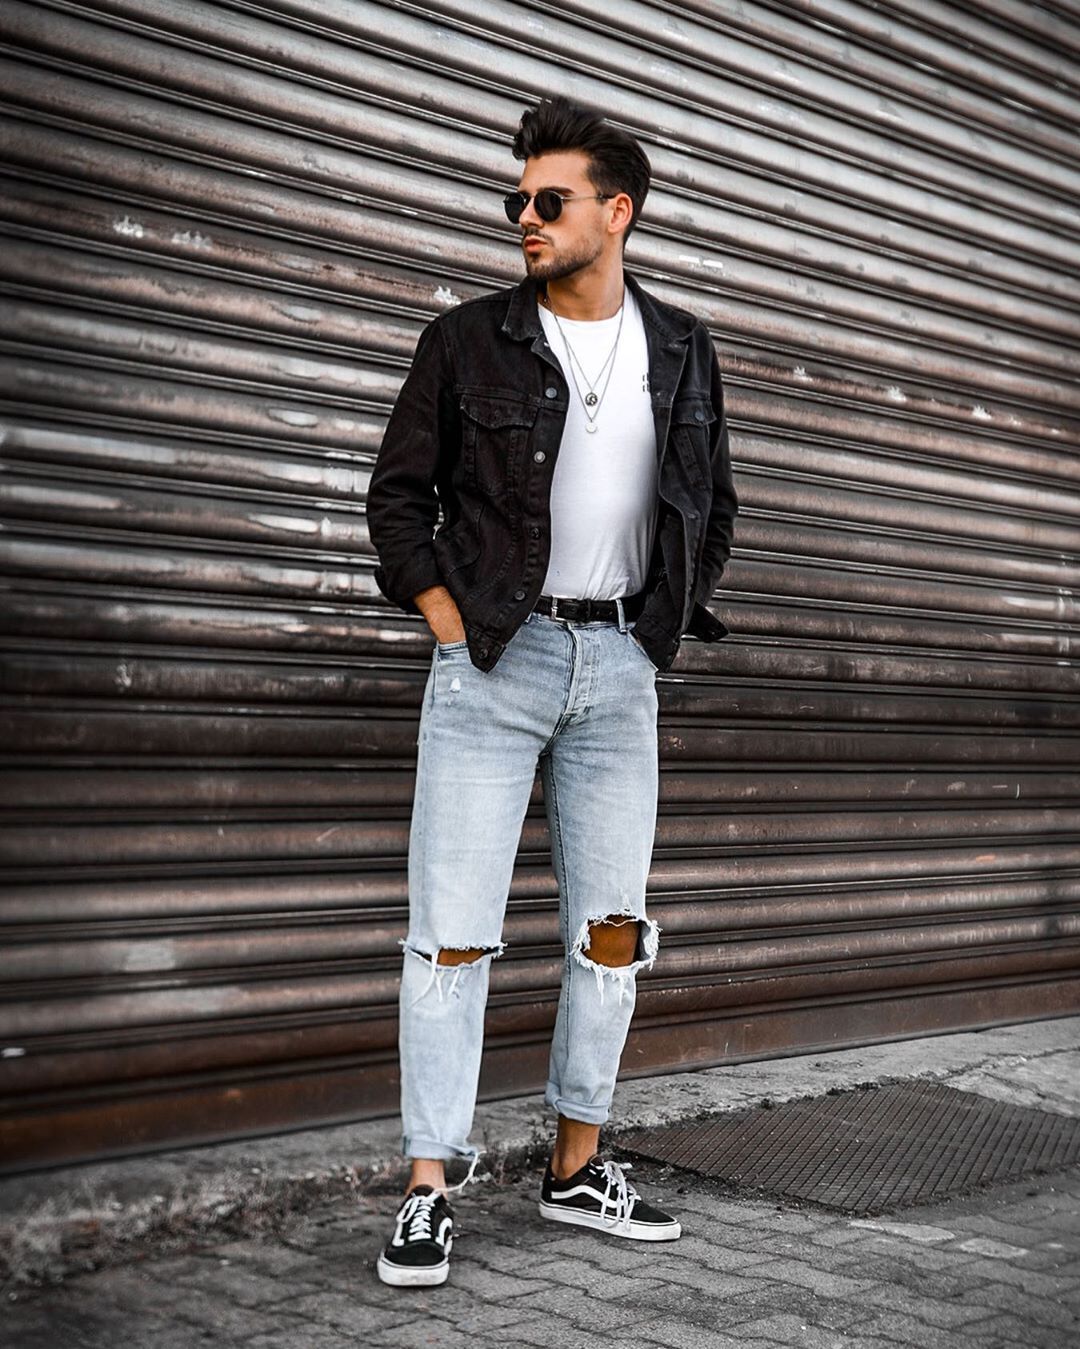 Men's Pink Denim Jacket, White Crew-neck T-shirt, Black Ripped Jeans, Black  and White Canvas High Top Sneakers